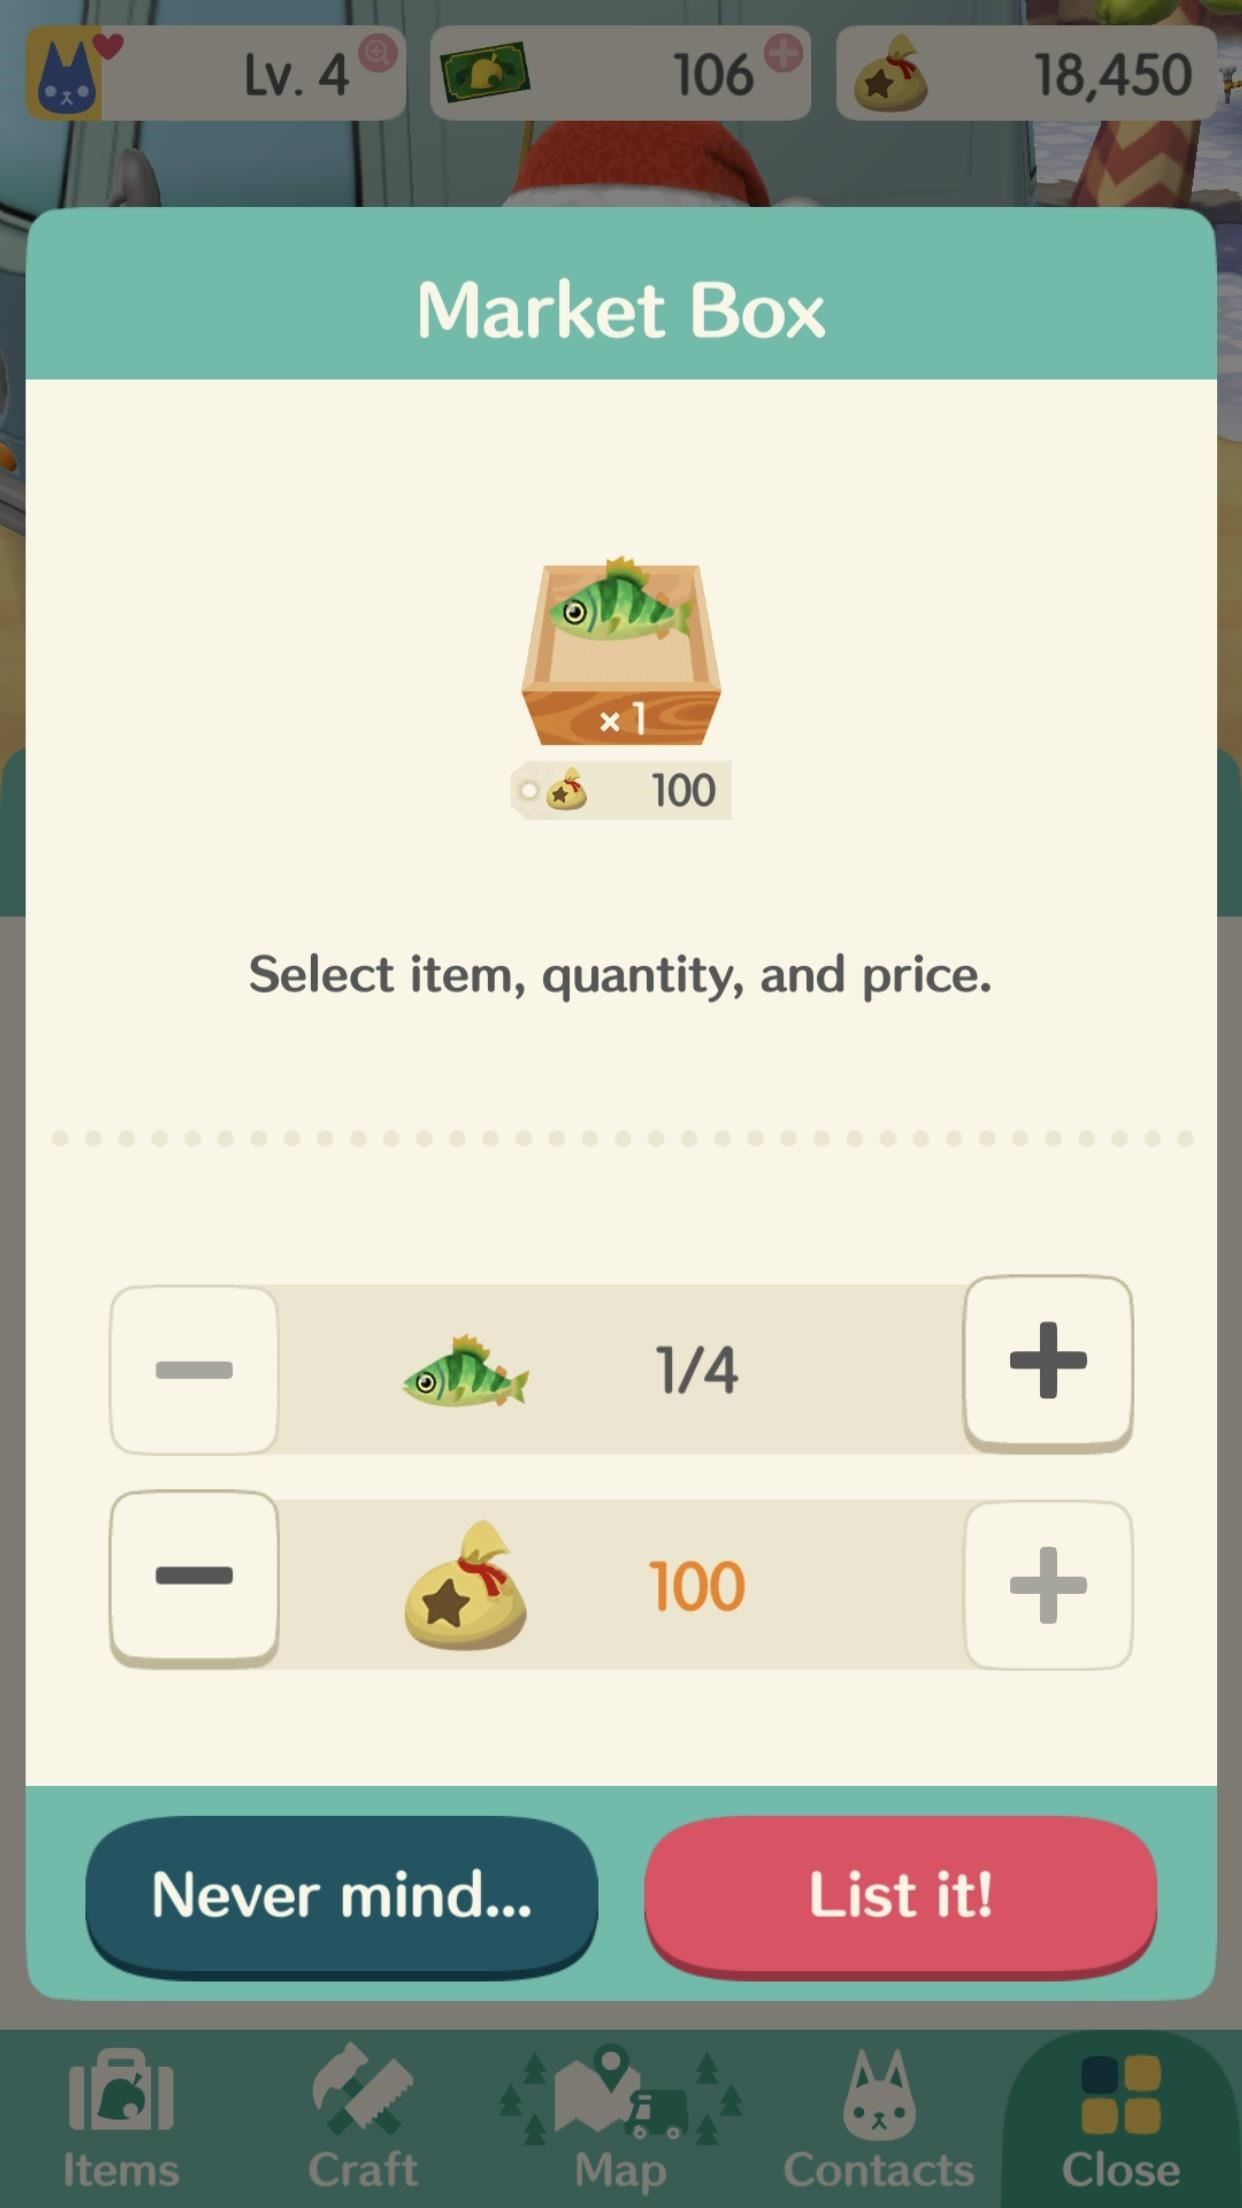 Pocket Camp 101: How to Use Market Boxes to Buy & Sell Items with Other Animal Crossing Players